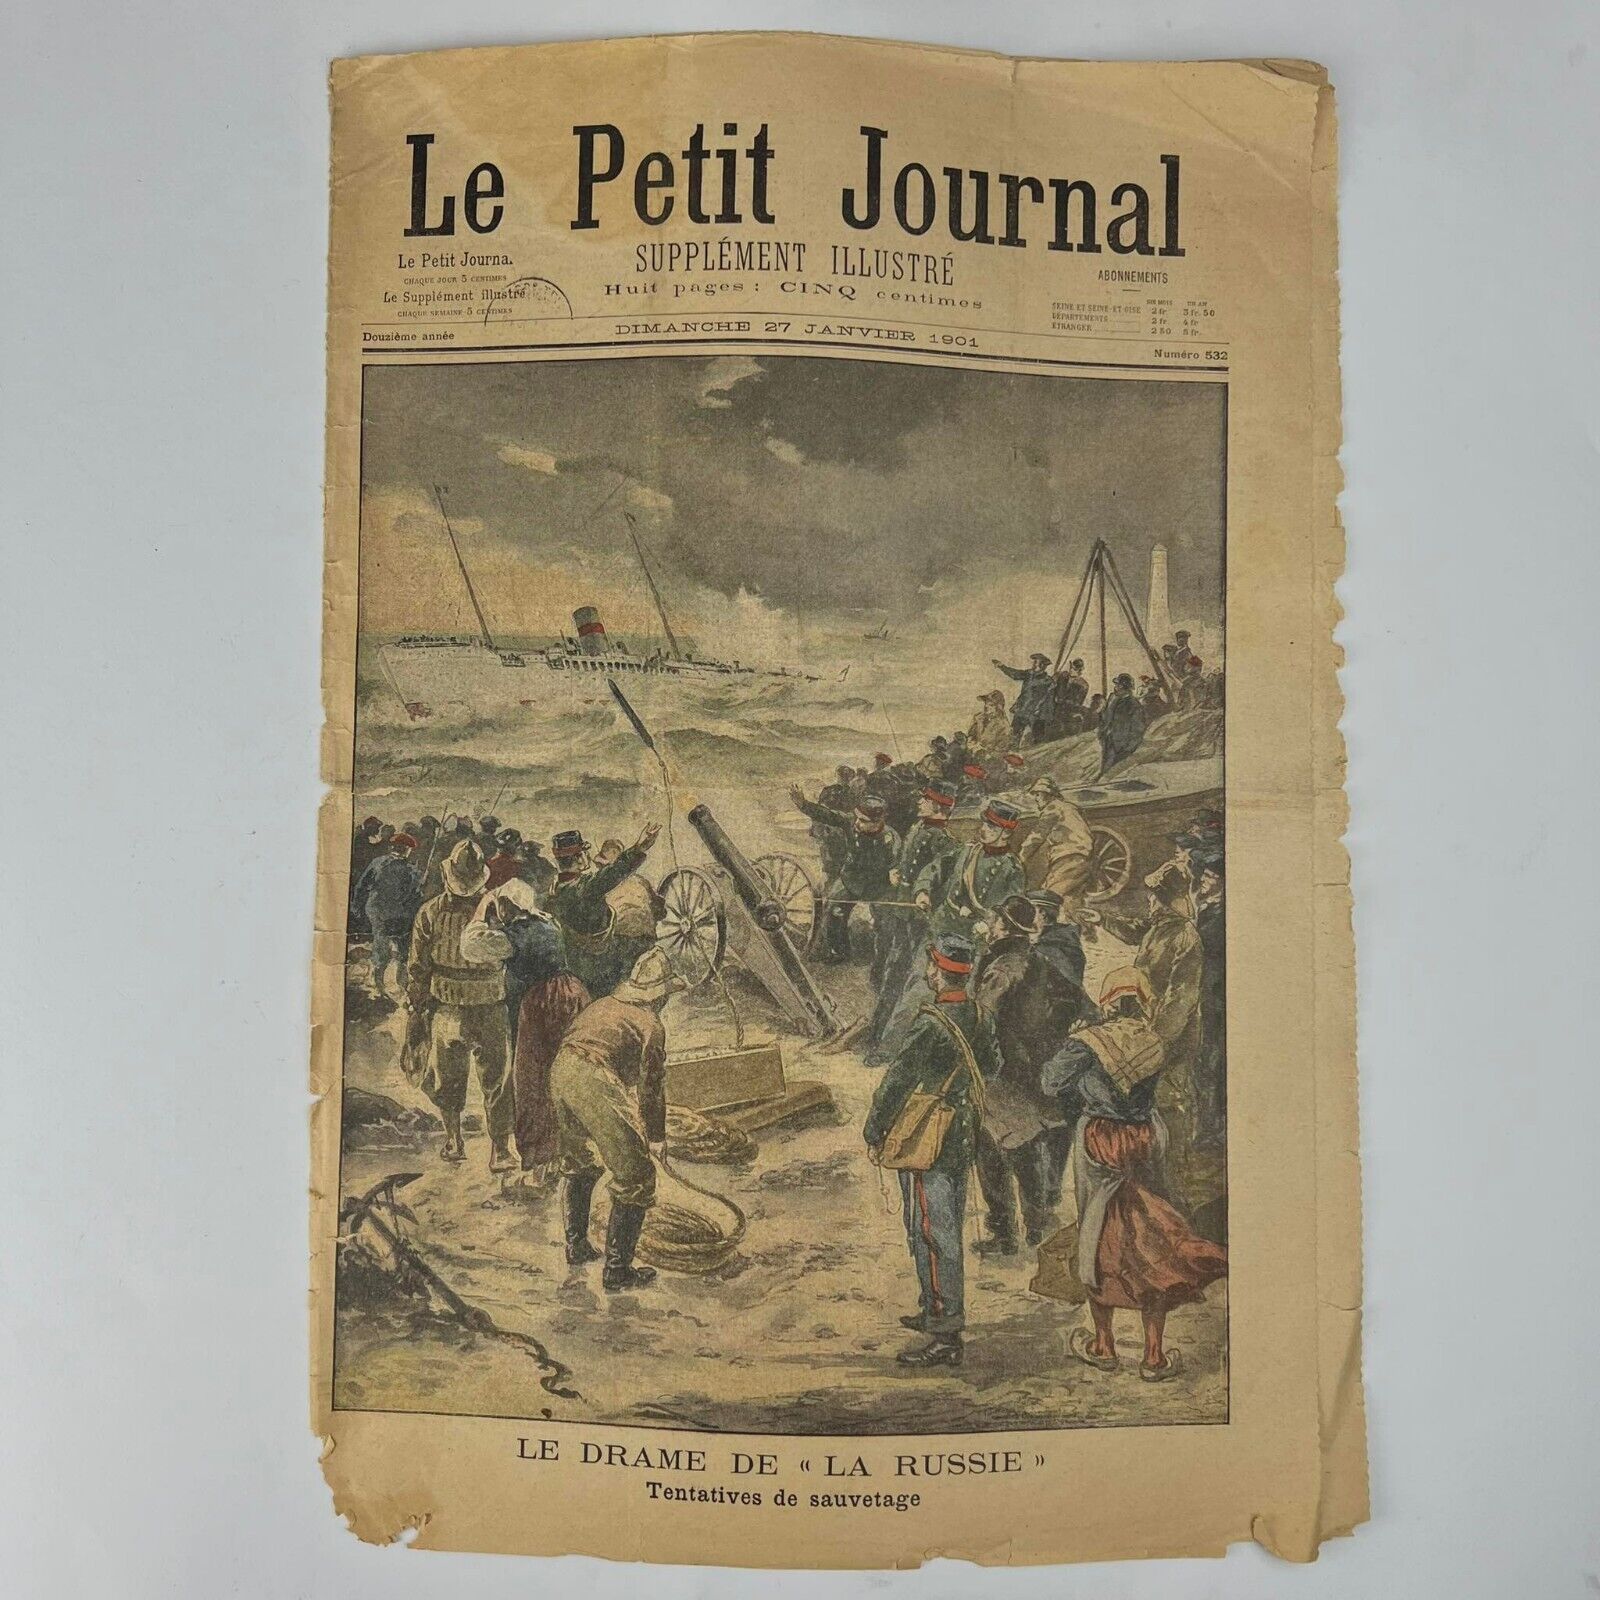 Antique Newspaper Le Petit Journal 1901 France Rare Collectibles Russian Drama